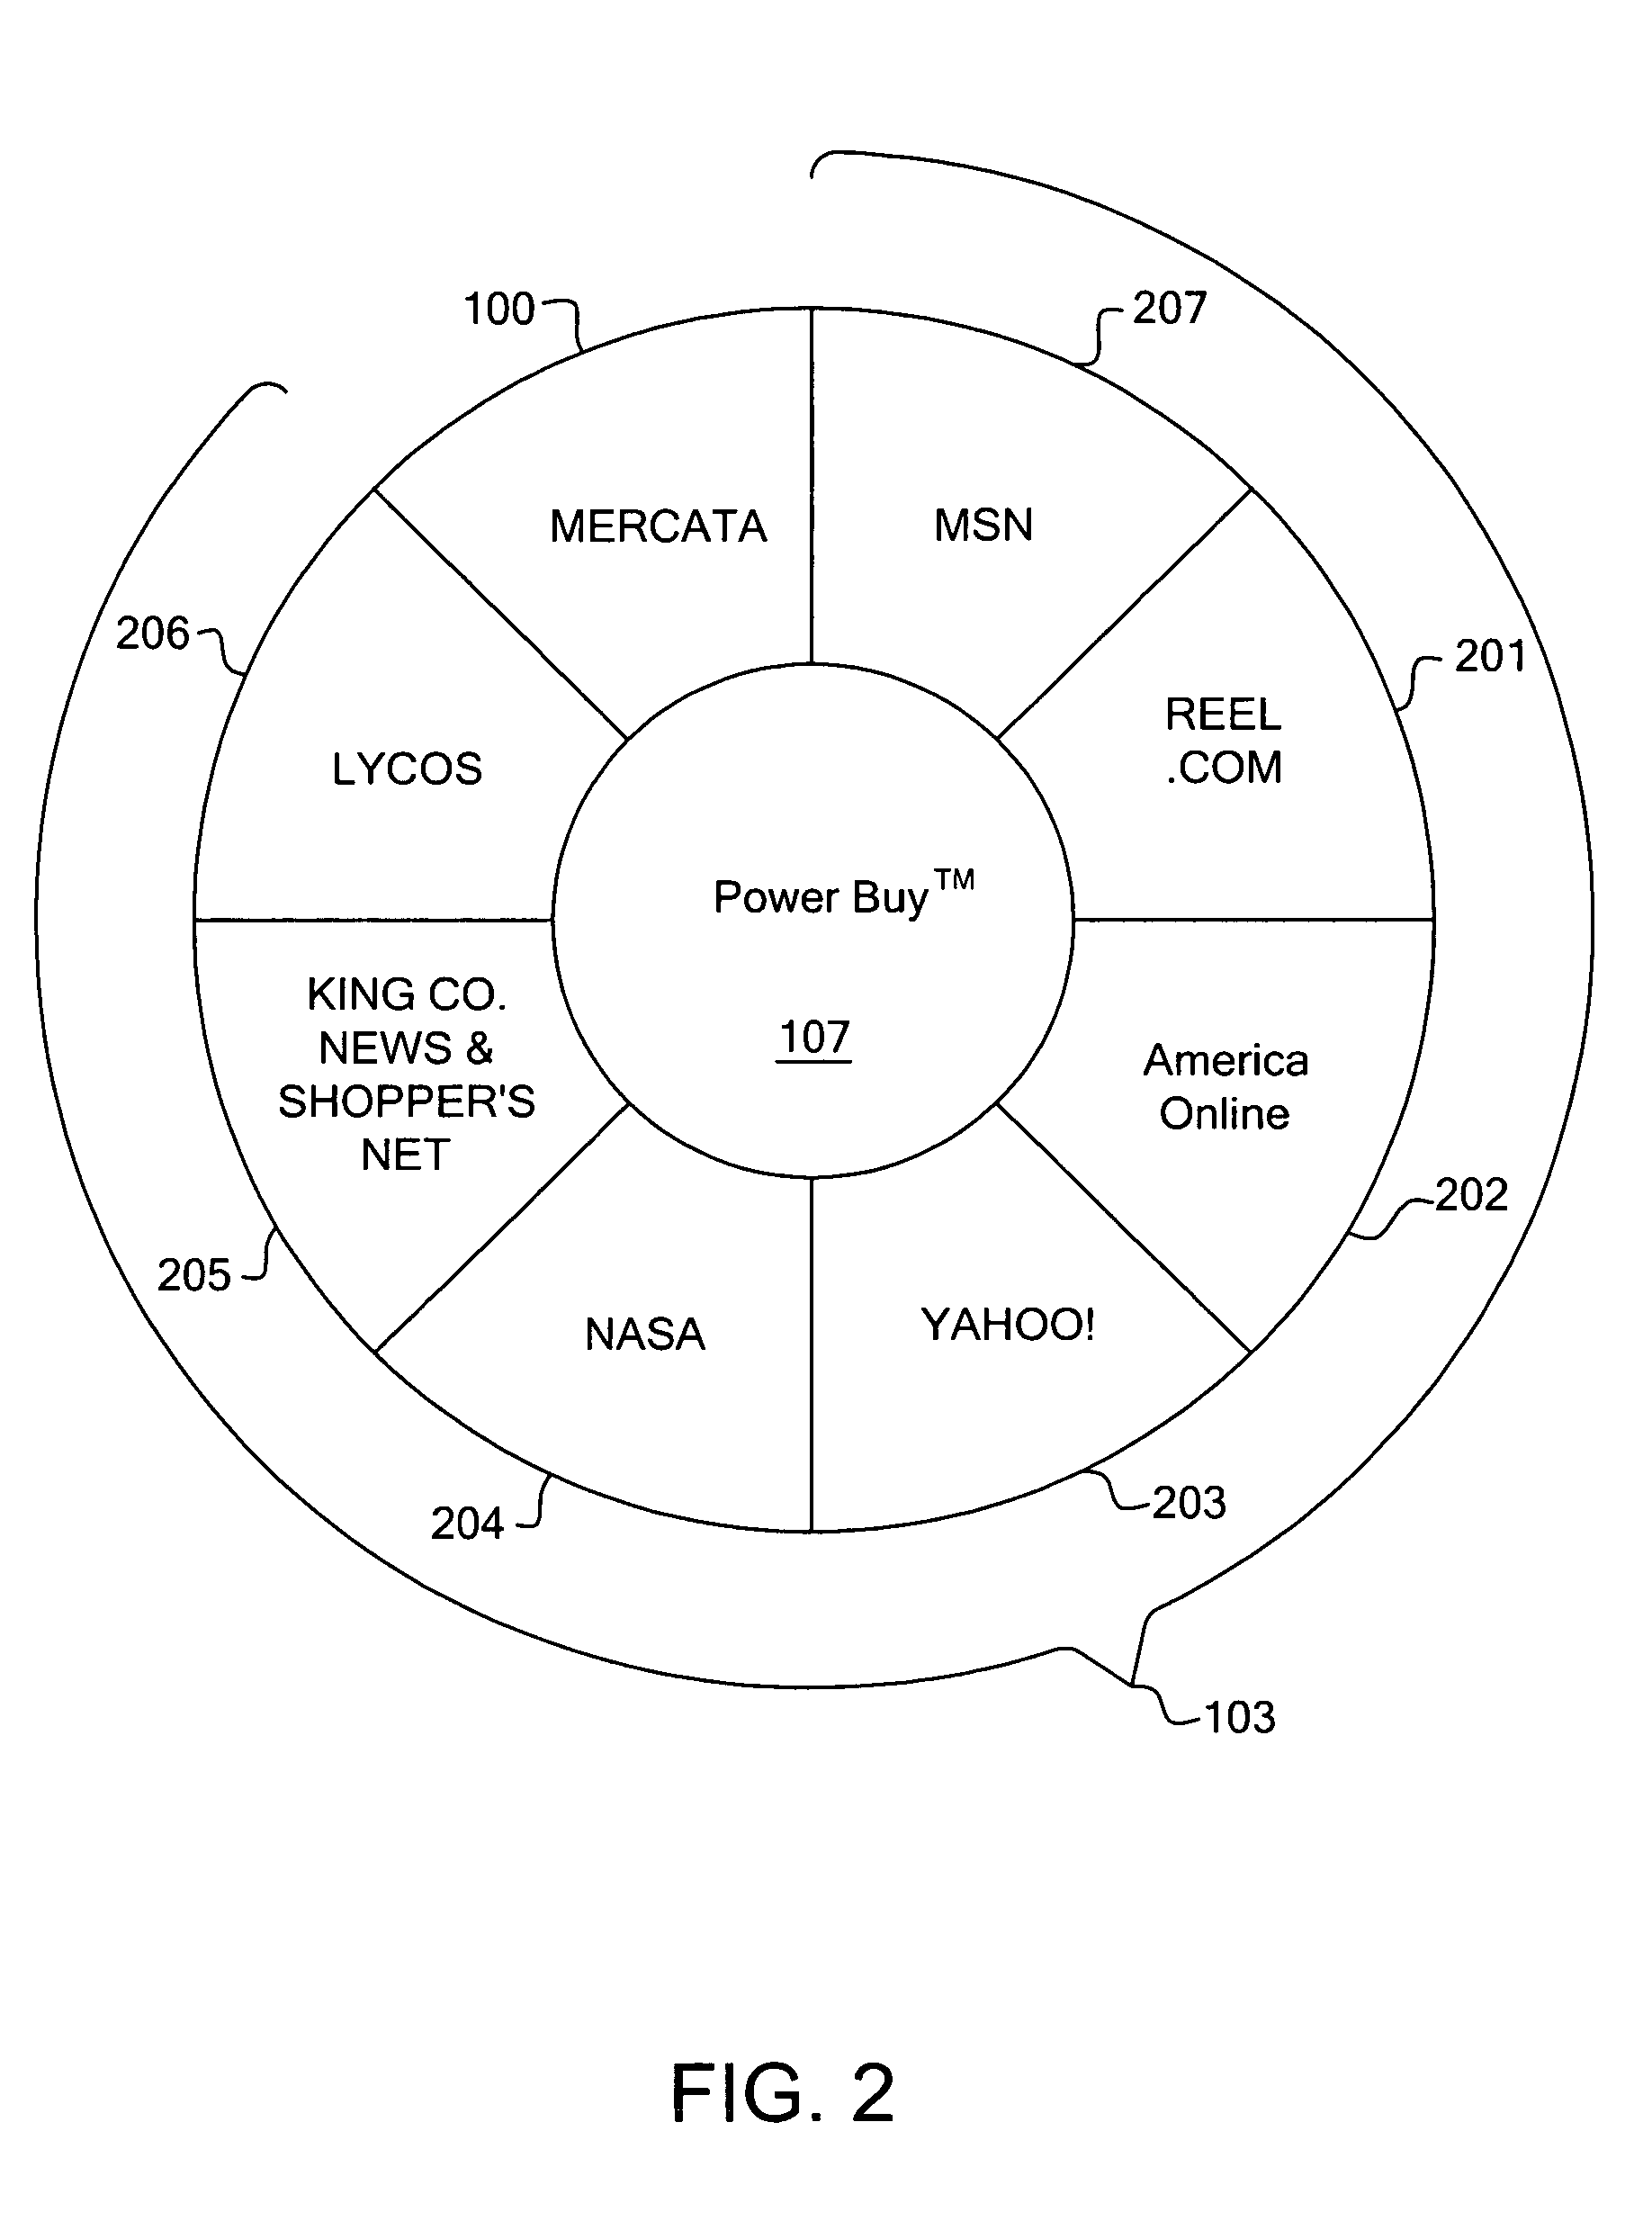 System and method for extension of group buying throughout the internet